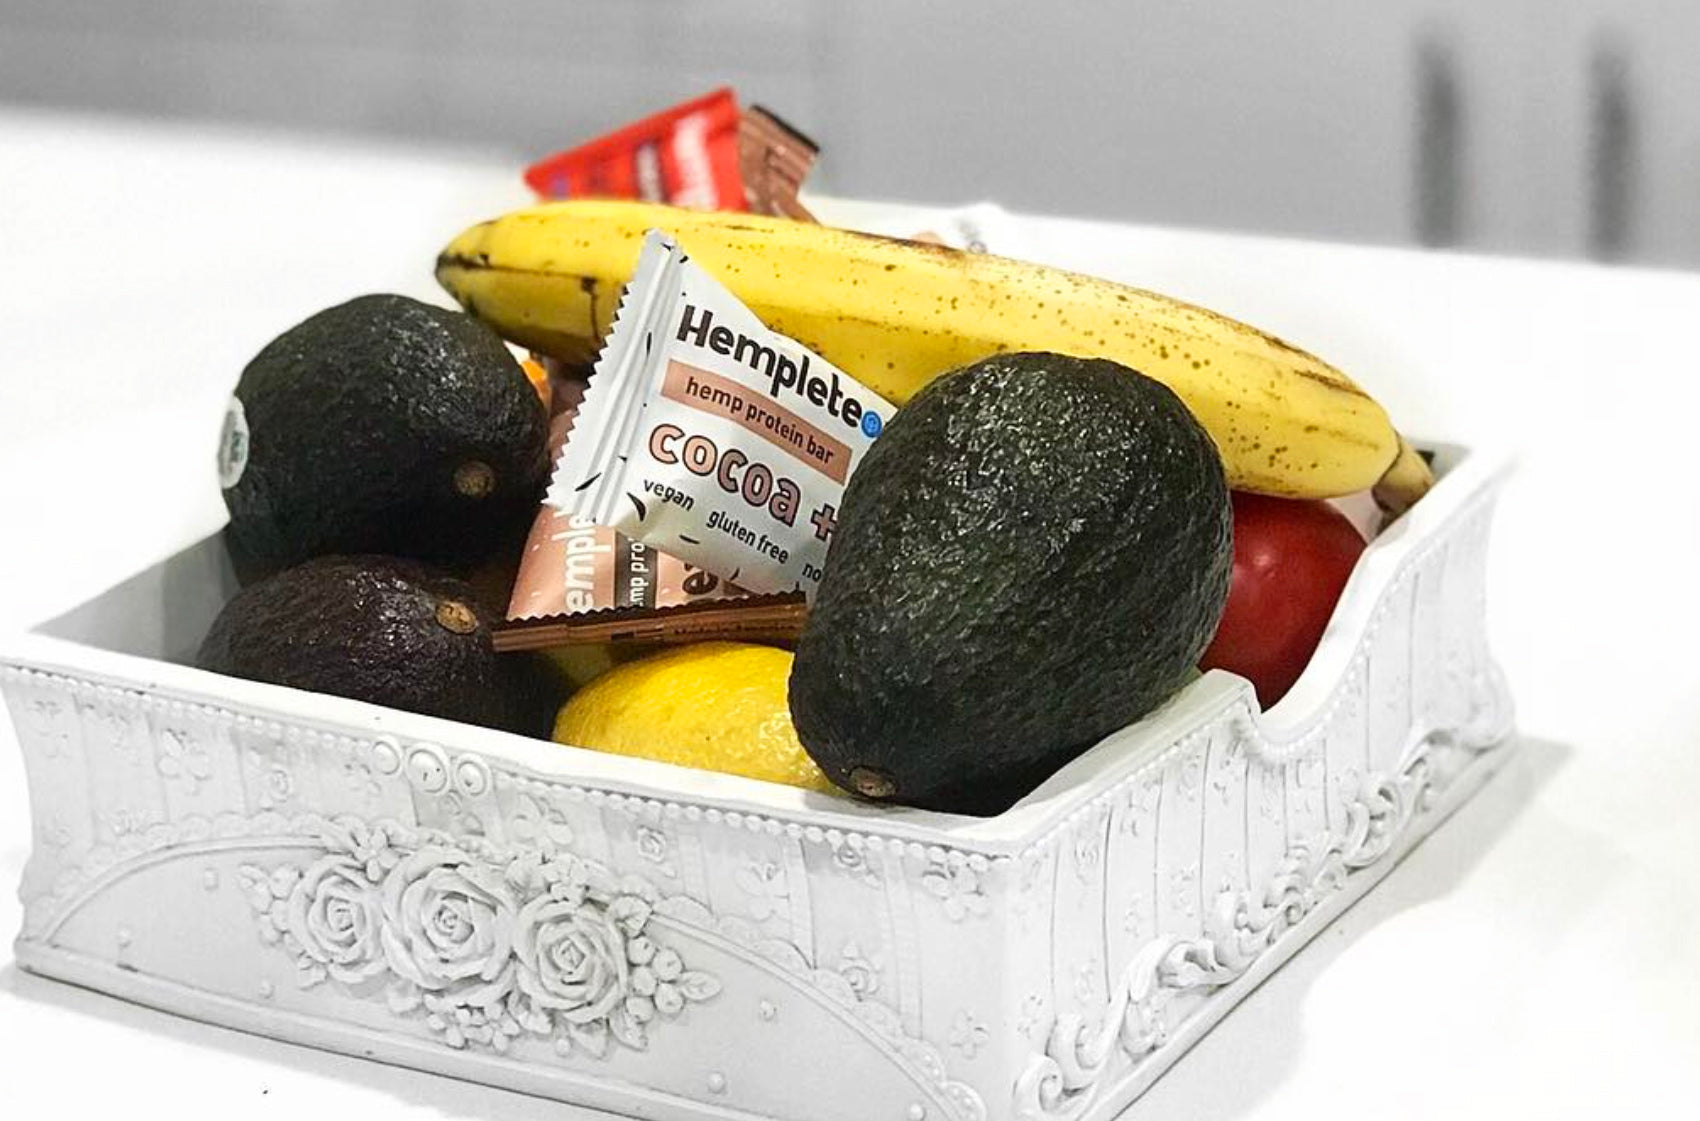 A box with energizing fruits, veggies, and nutrition bars.